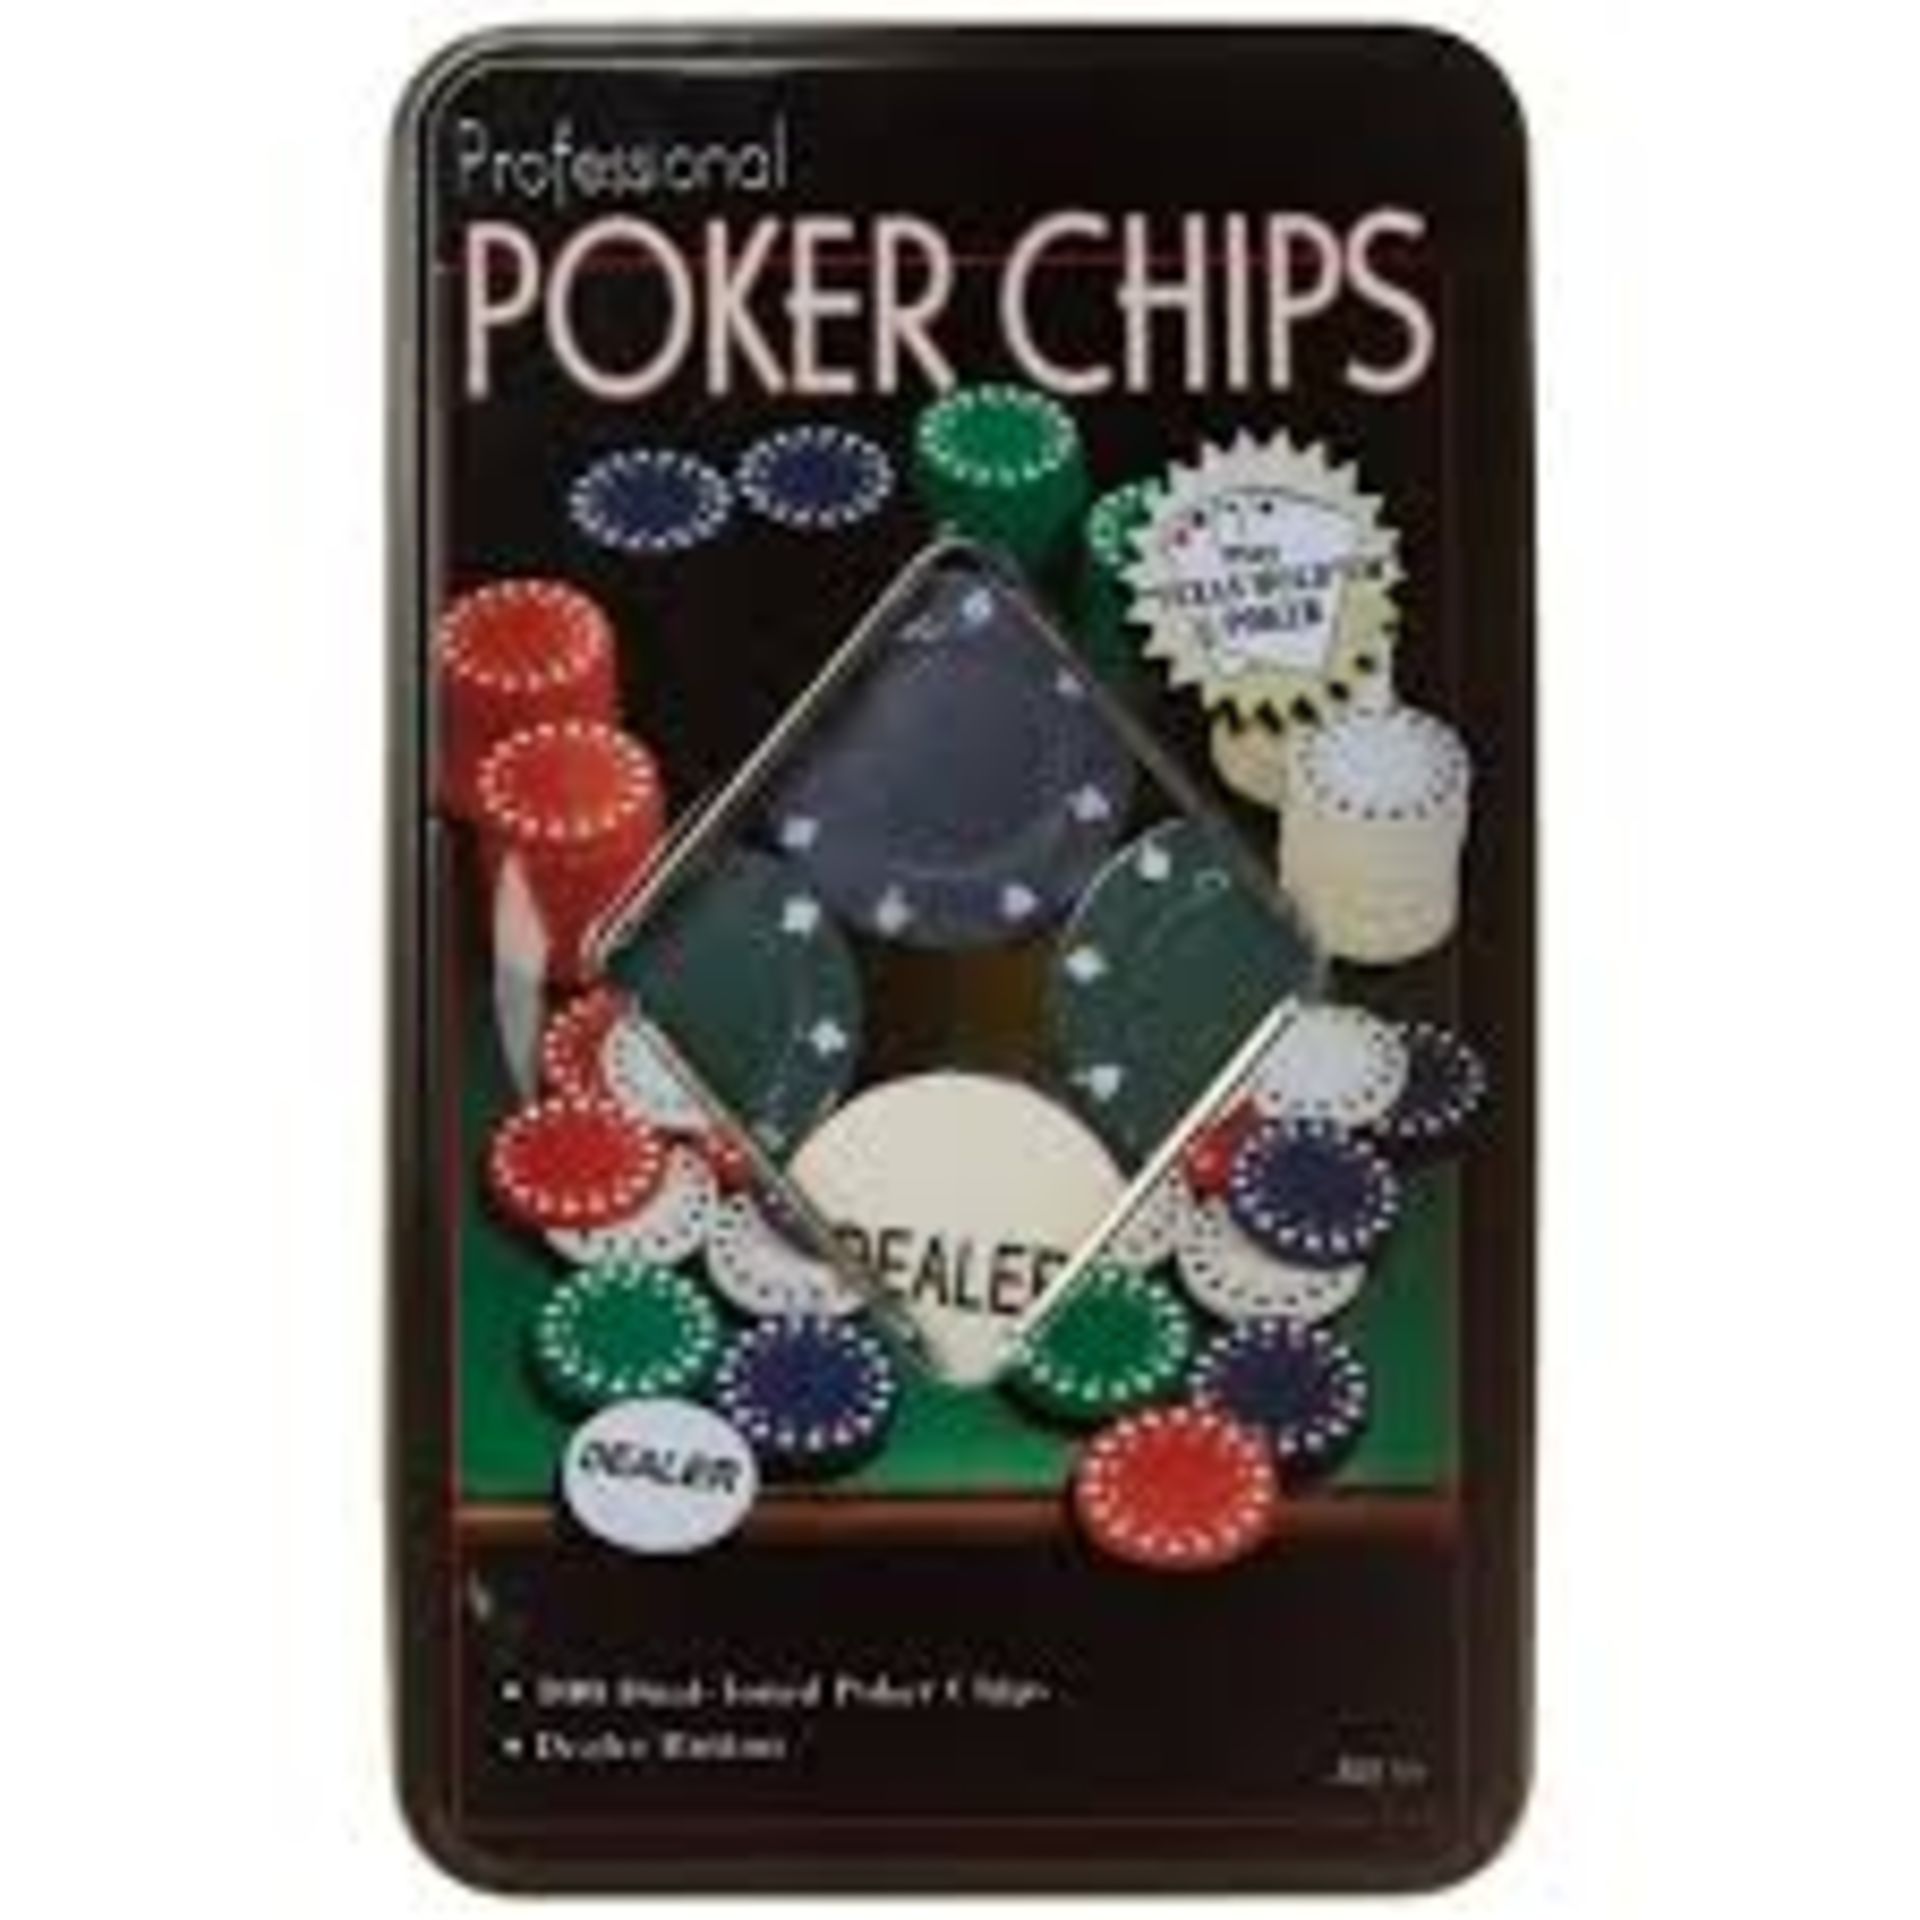 V *TRADE QTY* Brand New Box Of 100 Dual-Toned Professional Poker Chips Includes Dealer Button X 10